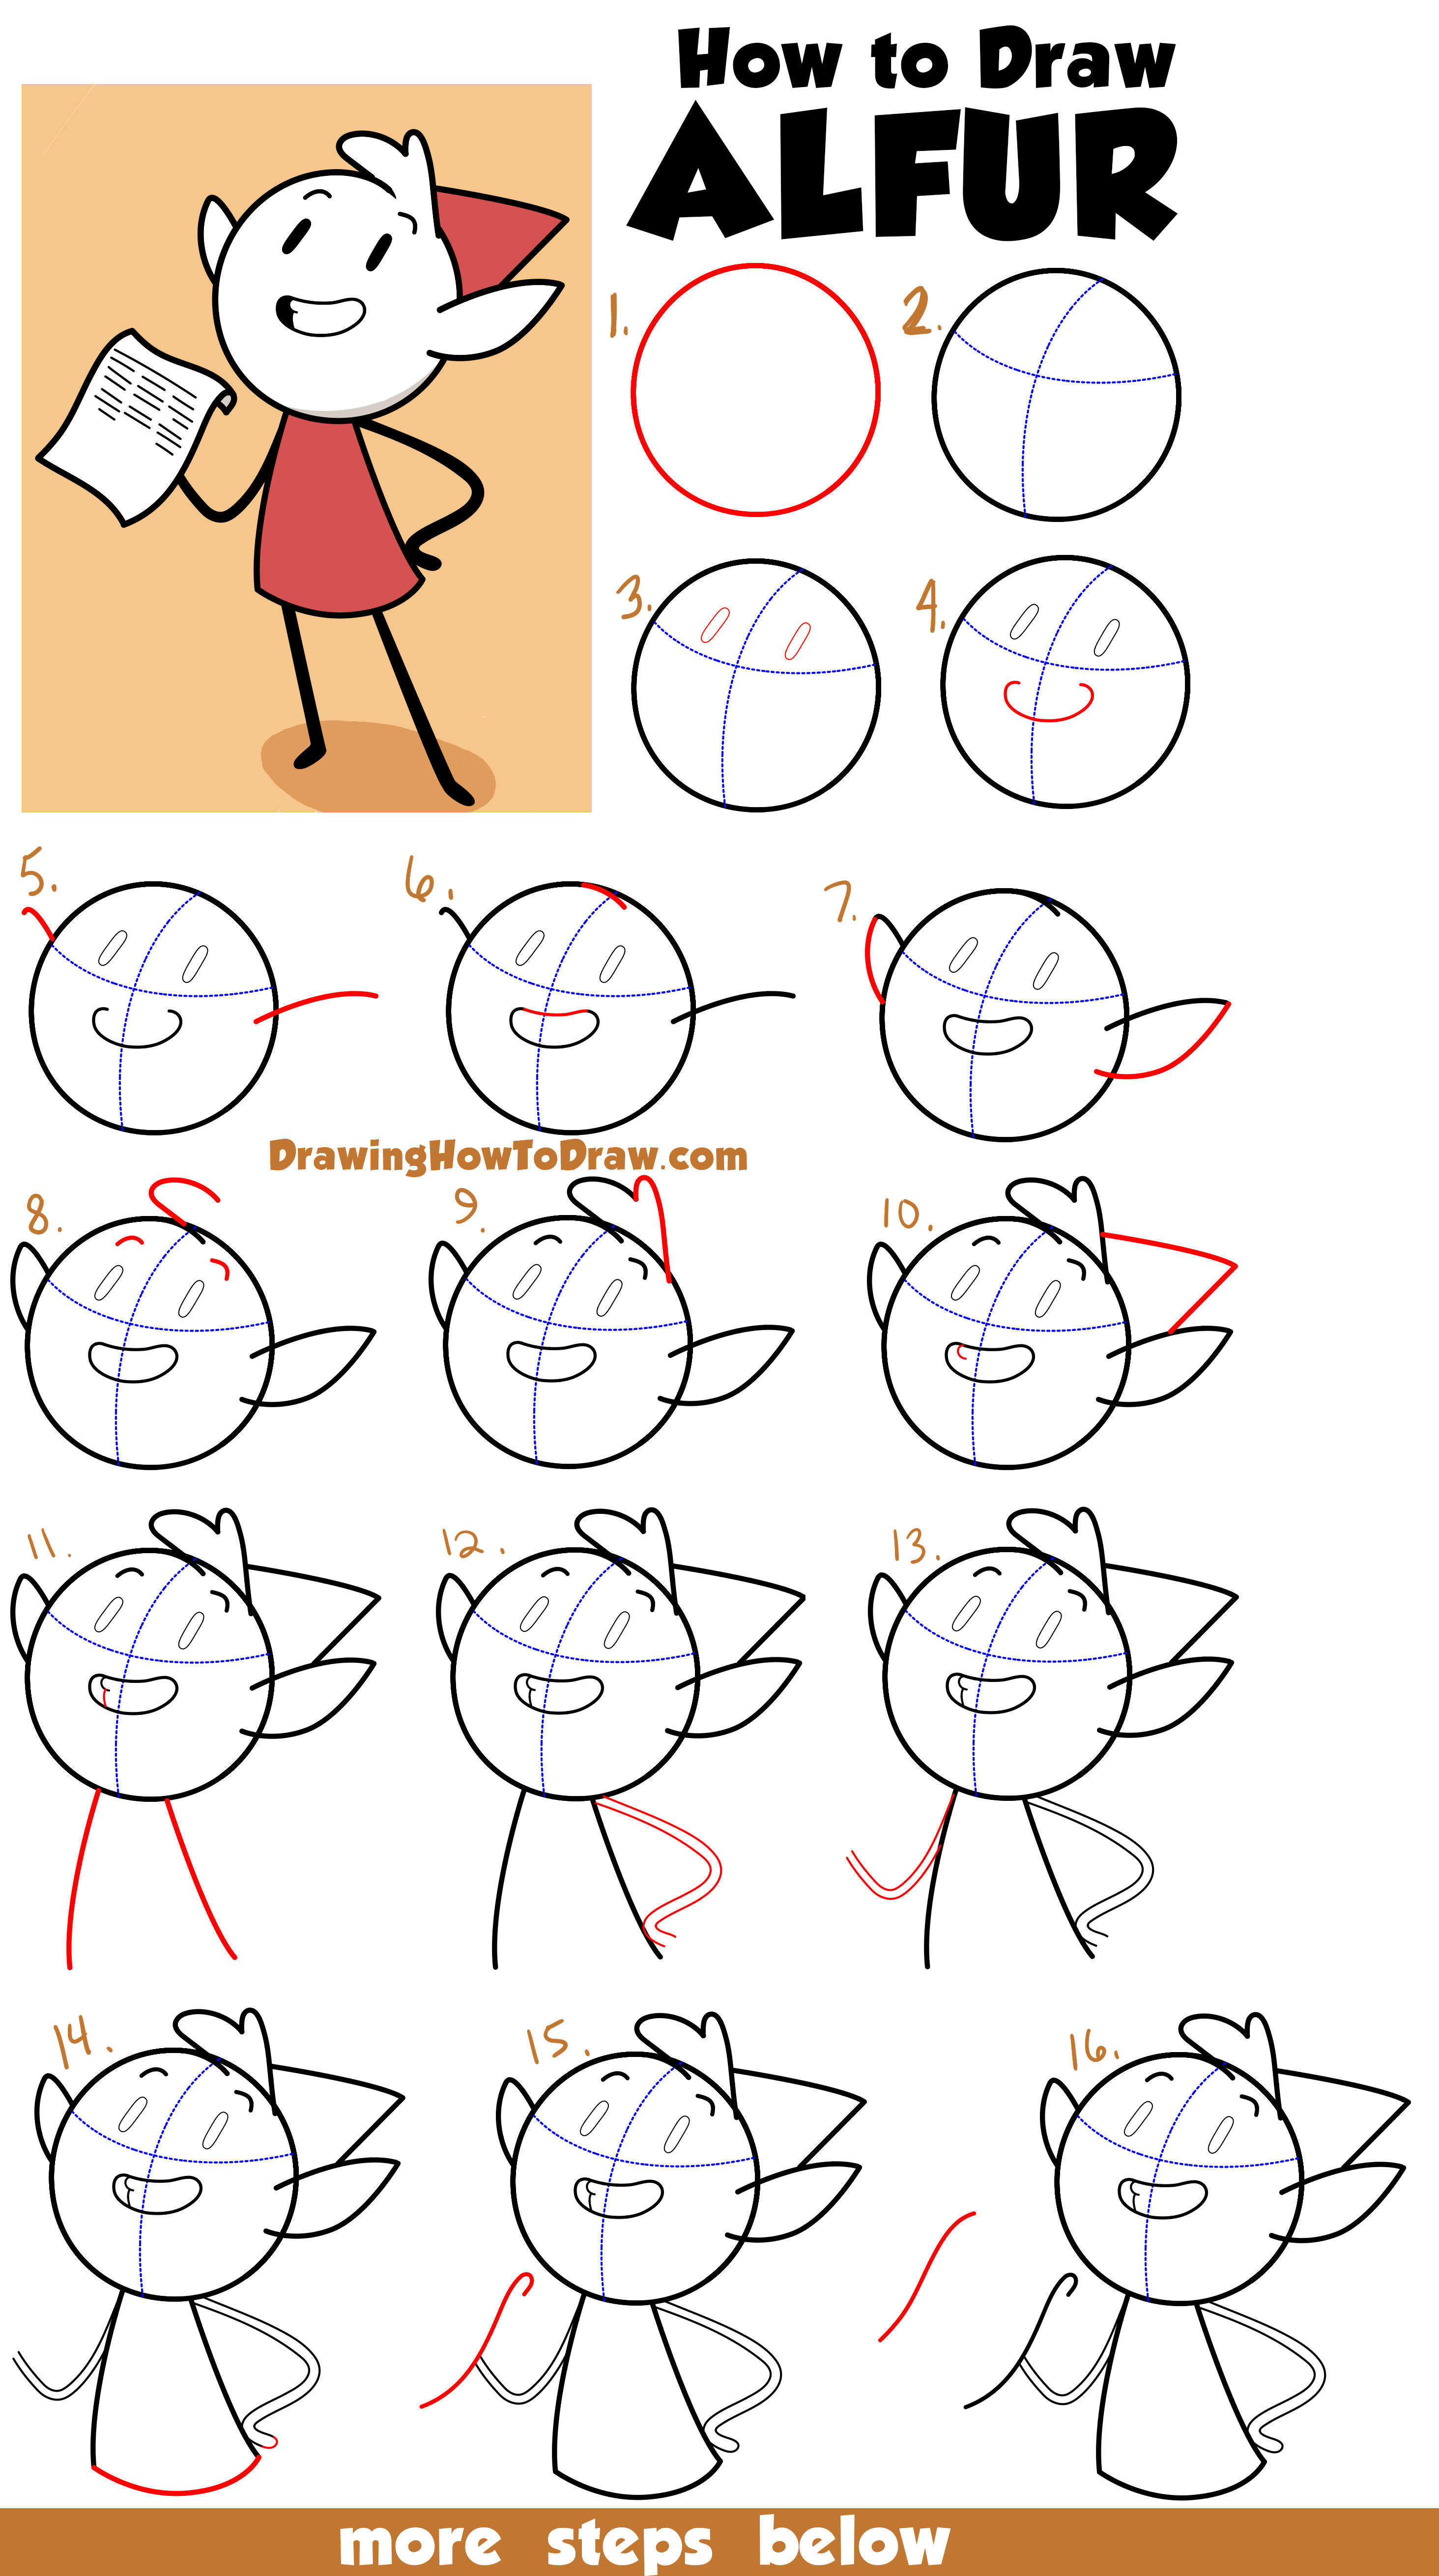 Learn How to Draw Alfur the Elf from Hilda Easy Step by Step Drawing Tutorial for Beginners + Kids